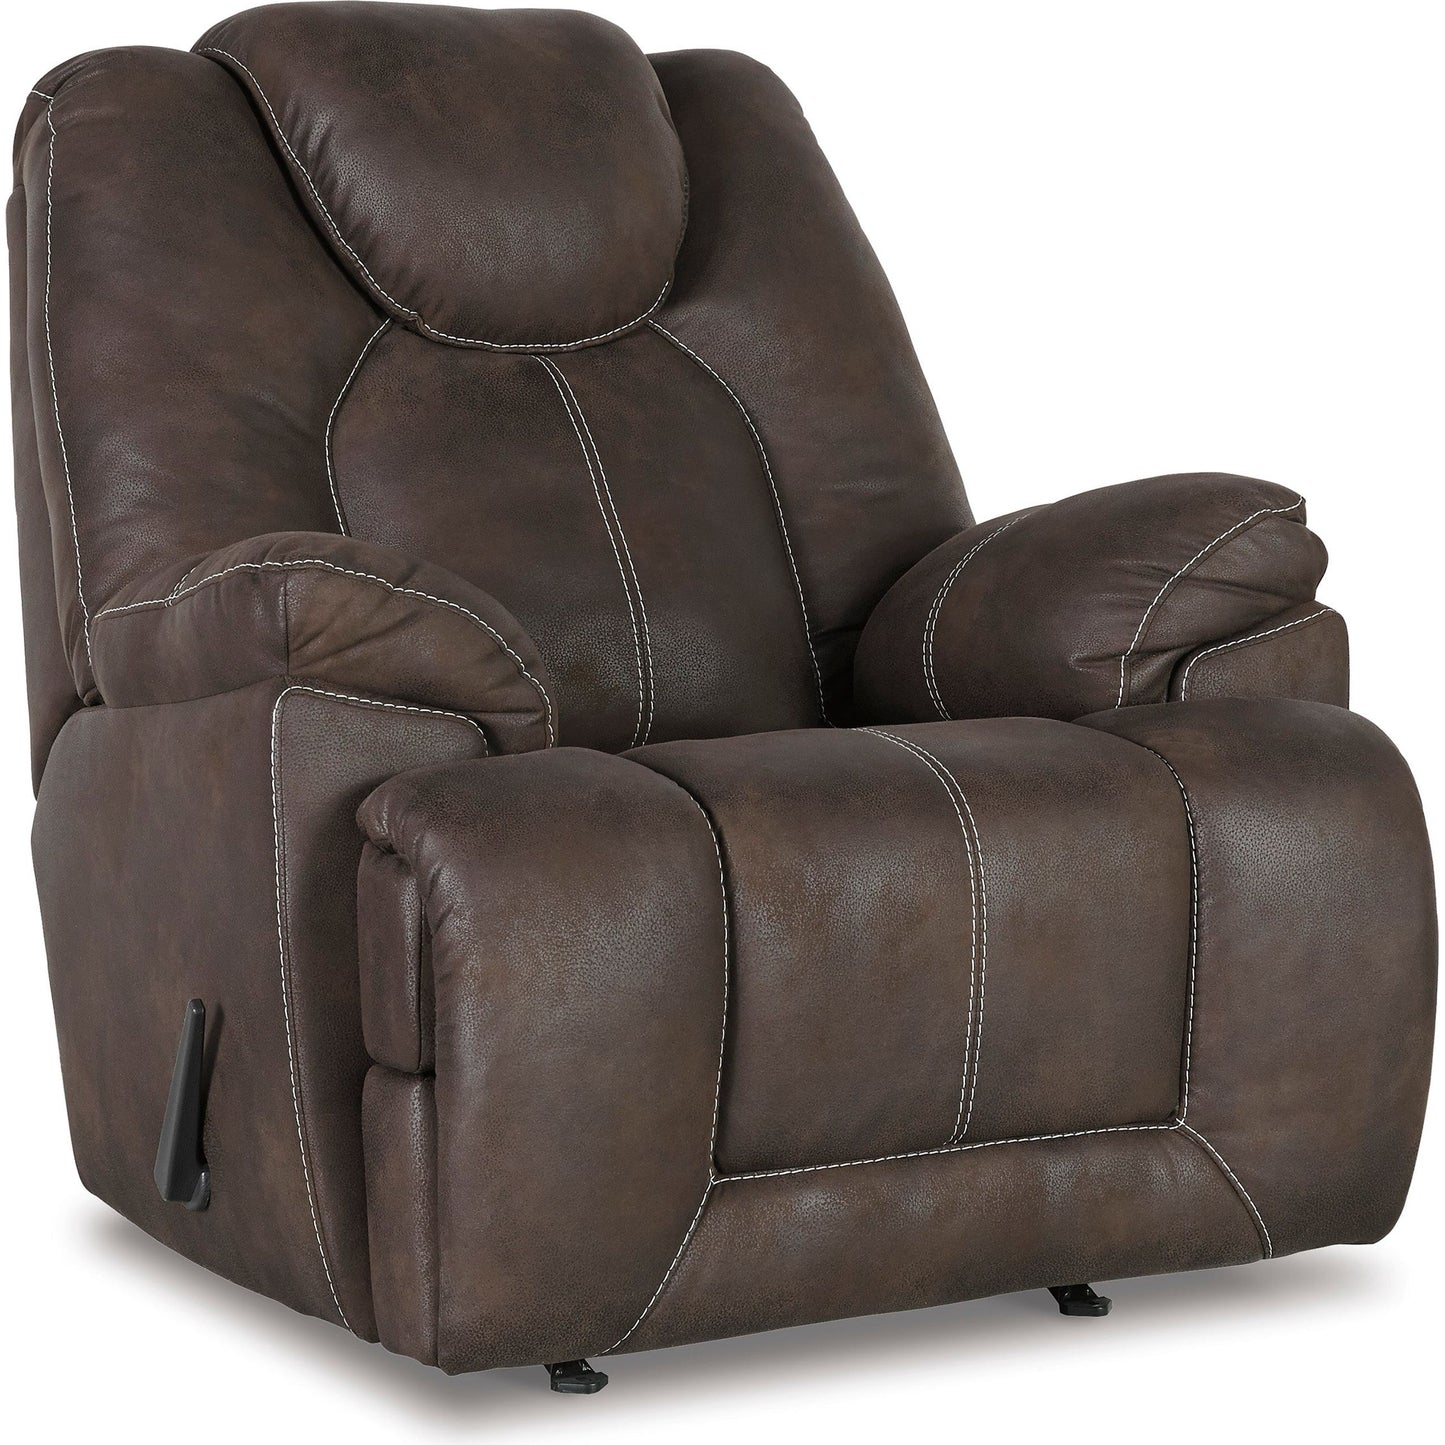 WARRIOR FORTRESS RECLINER - COFFEE